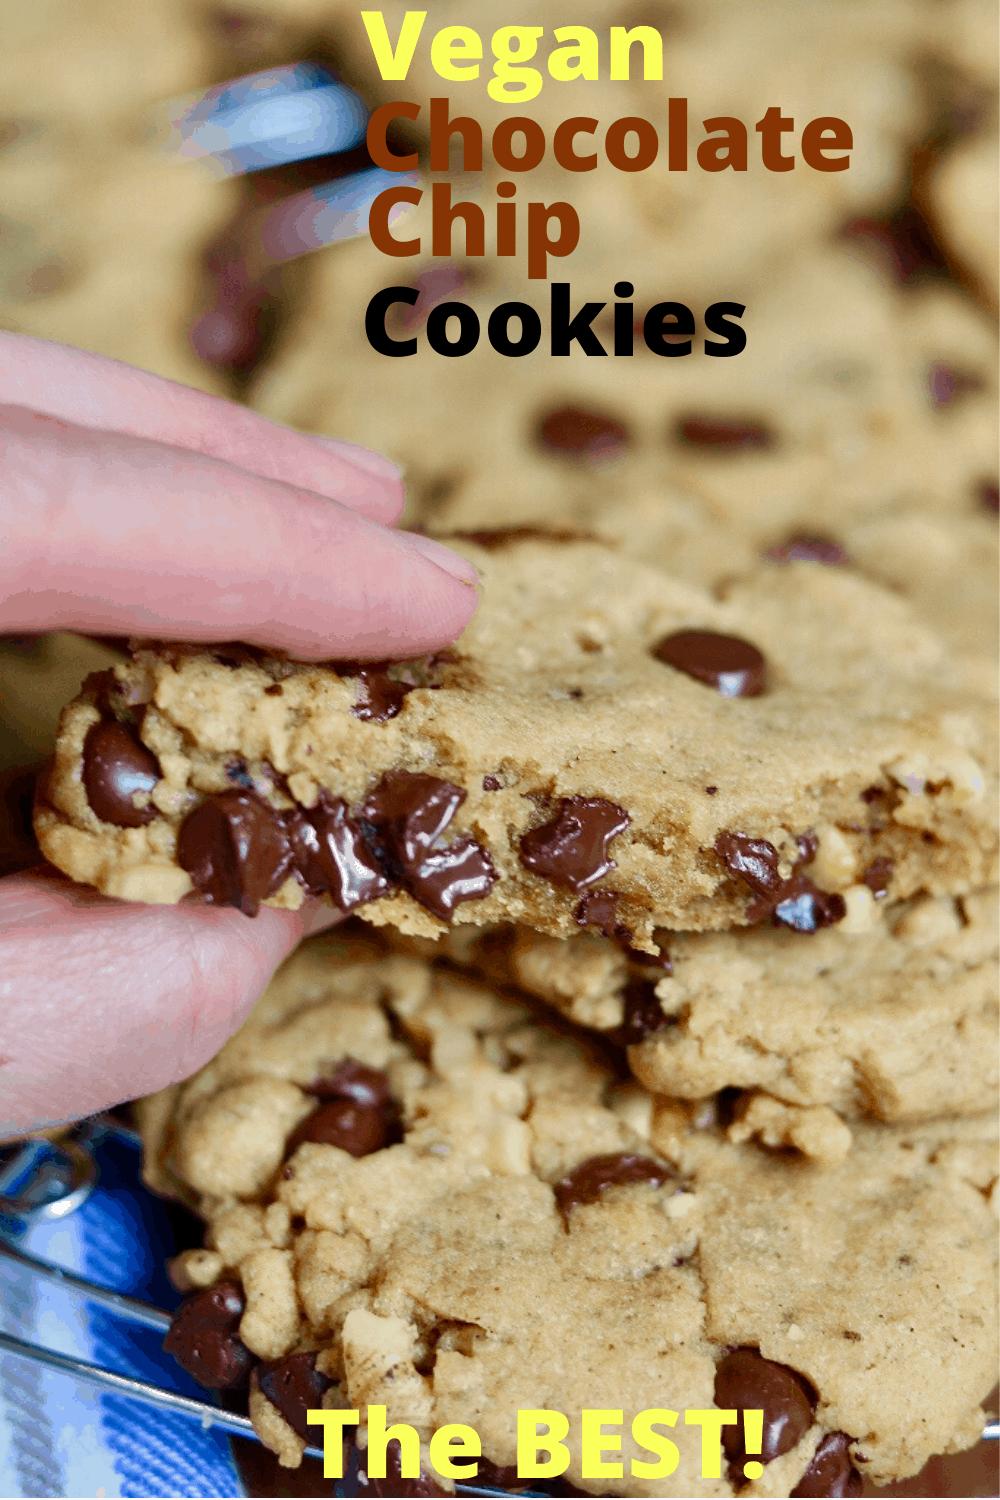 The Best Vegan Chocolate Chip Cookies - The Cheeky Chickpea